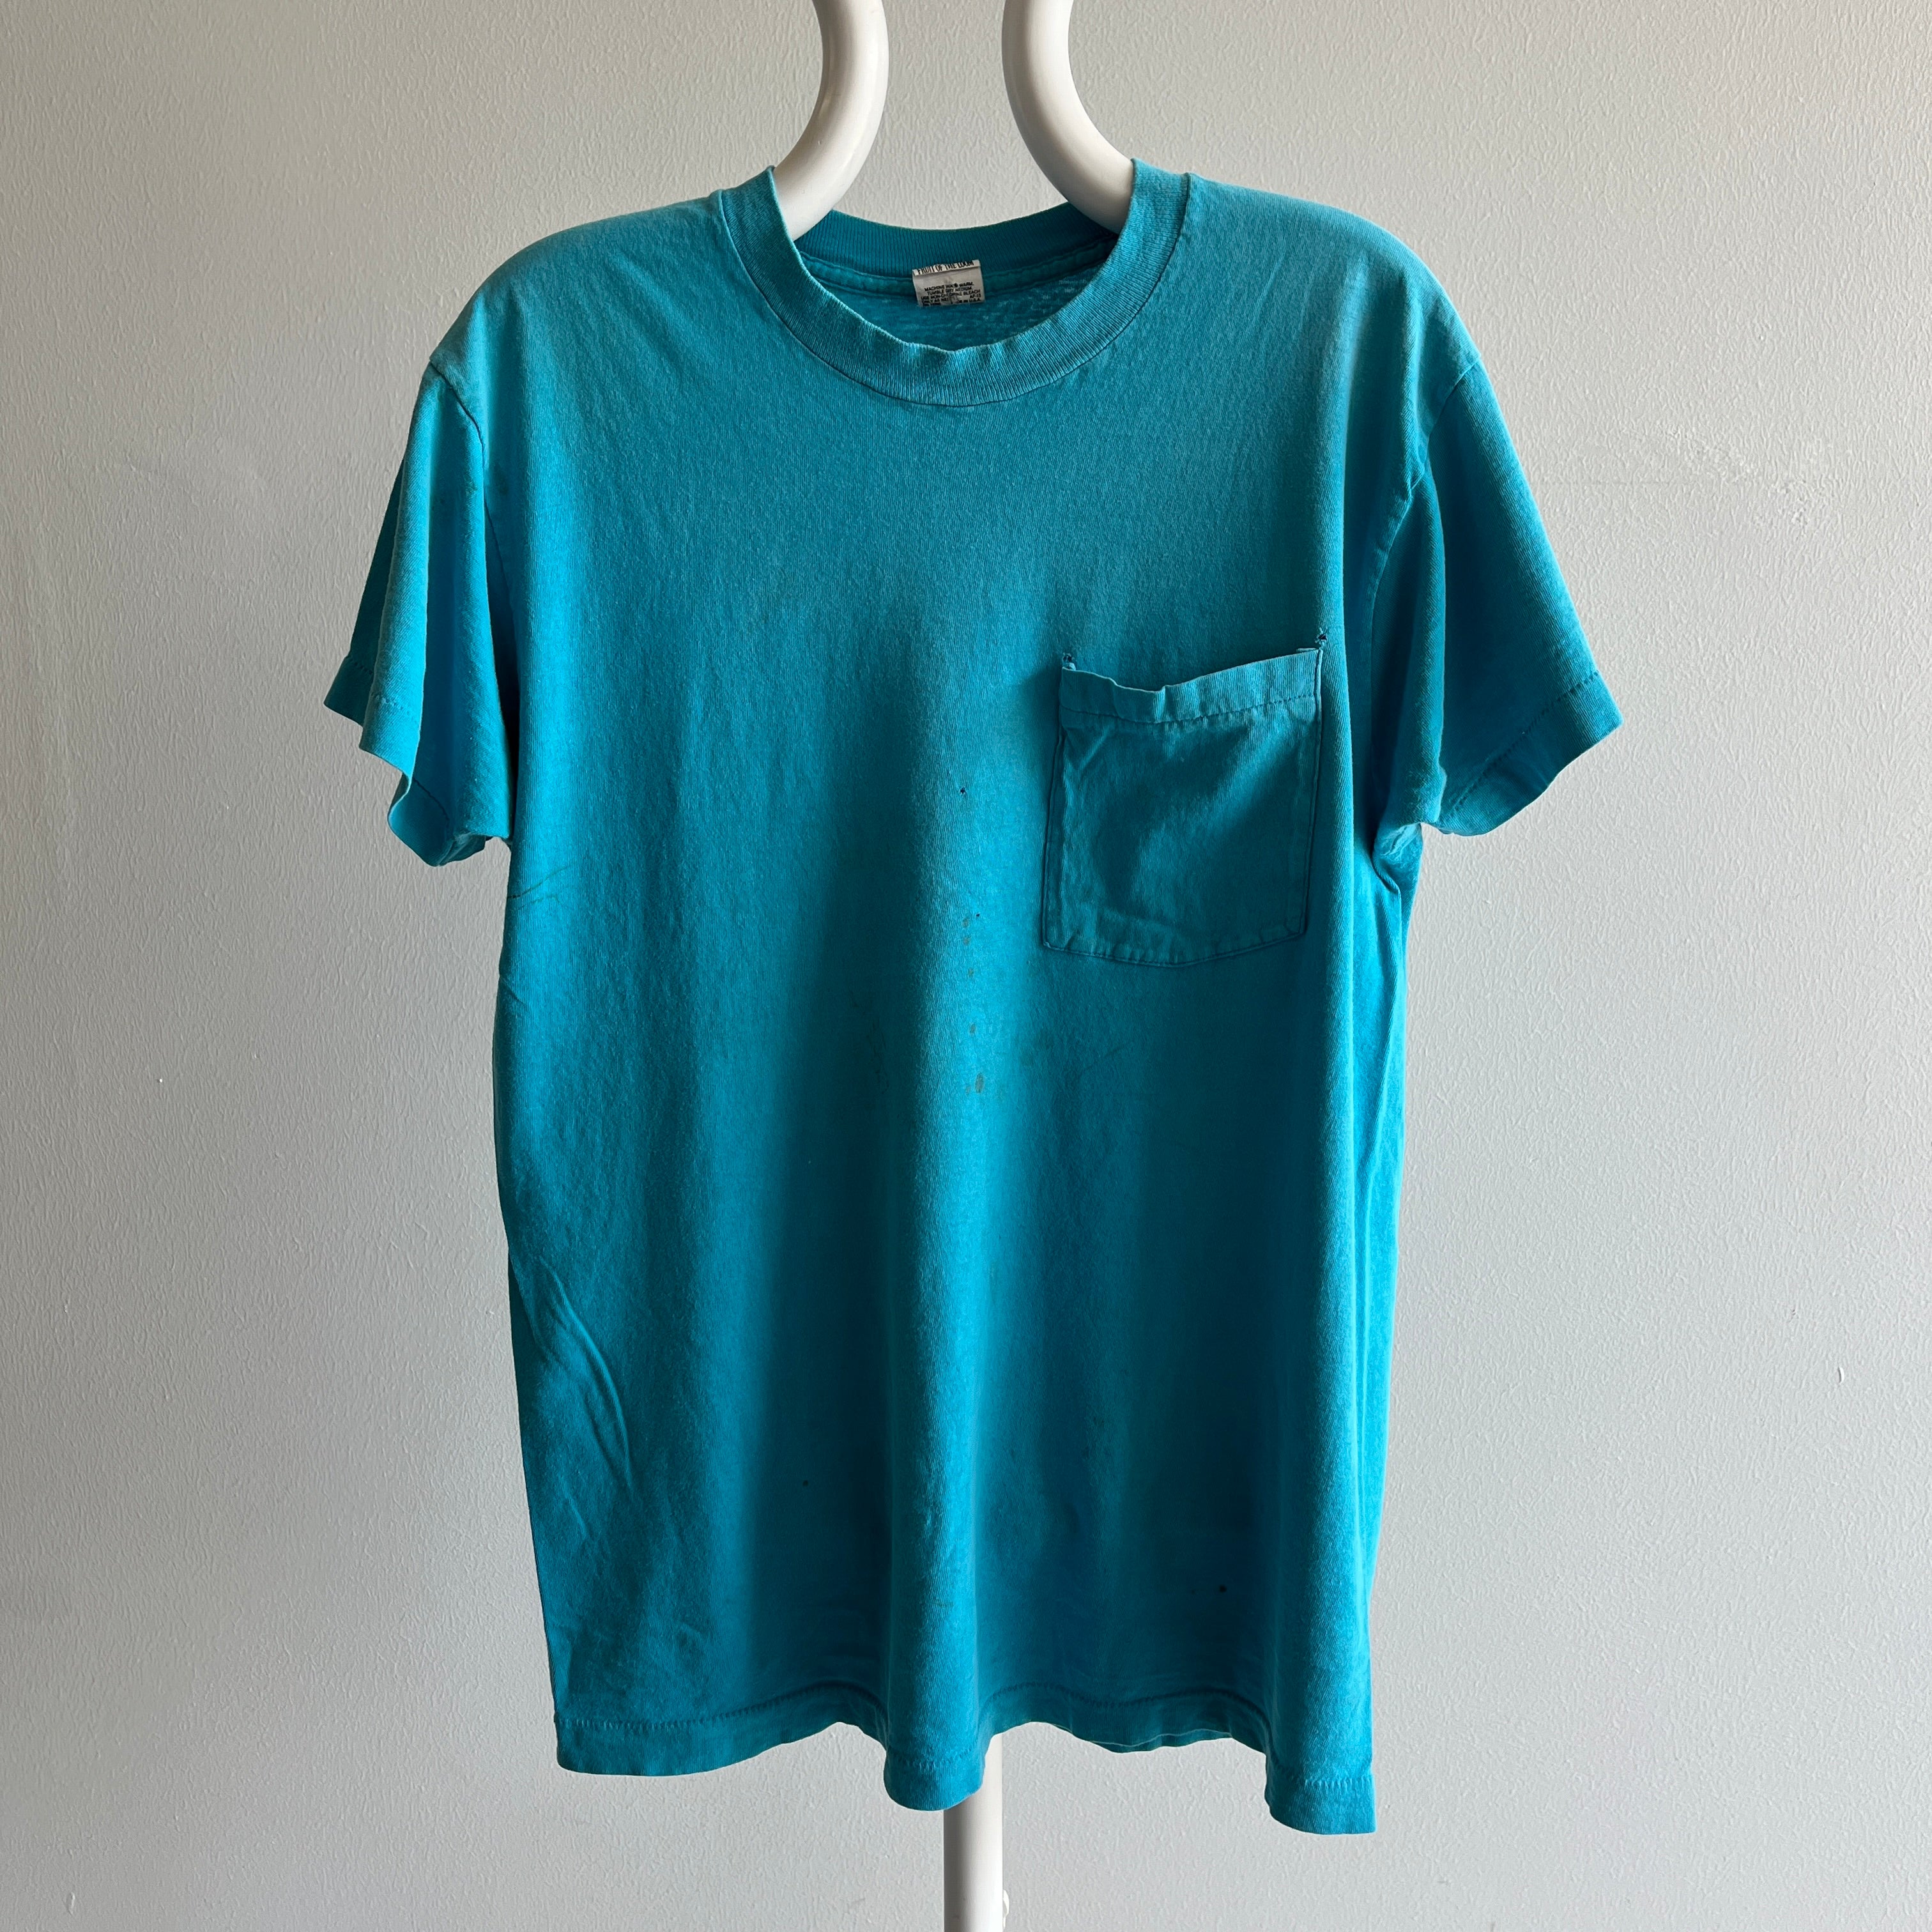 1980s Soft Beat Up Stained and Delightful FOTL Blank Teal Pocket T-Shirt - THIS IS GREAT!!